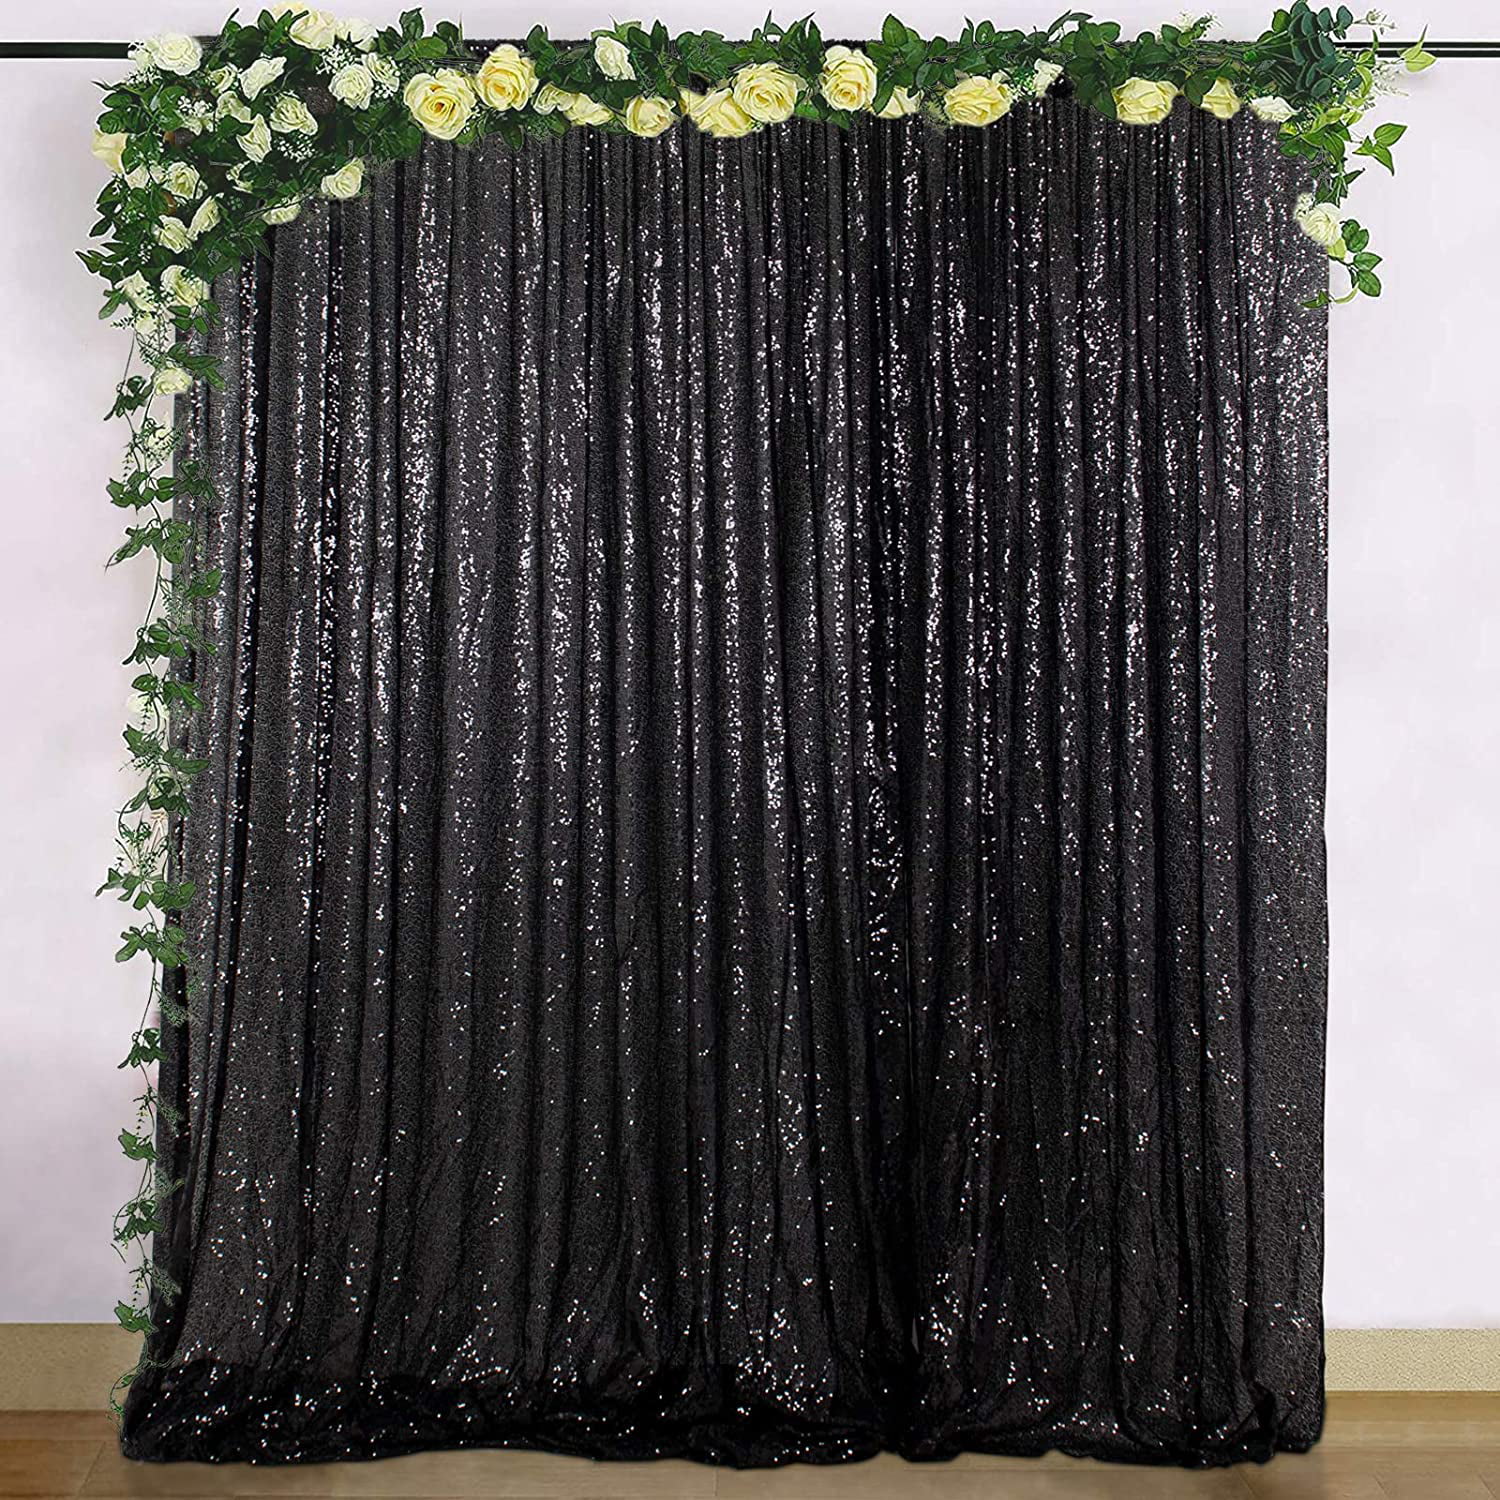 4FTX6FT Sequin Curtain Wedding Photobooth Backdrop Party Photography Background